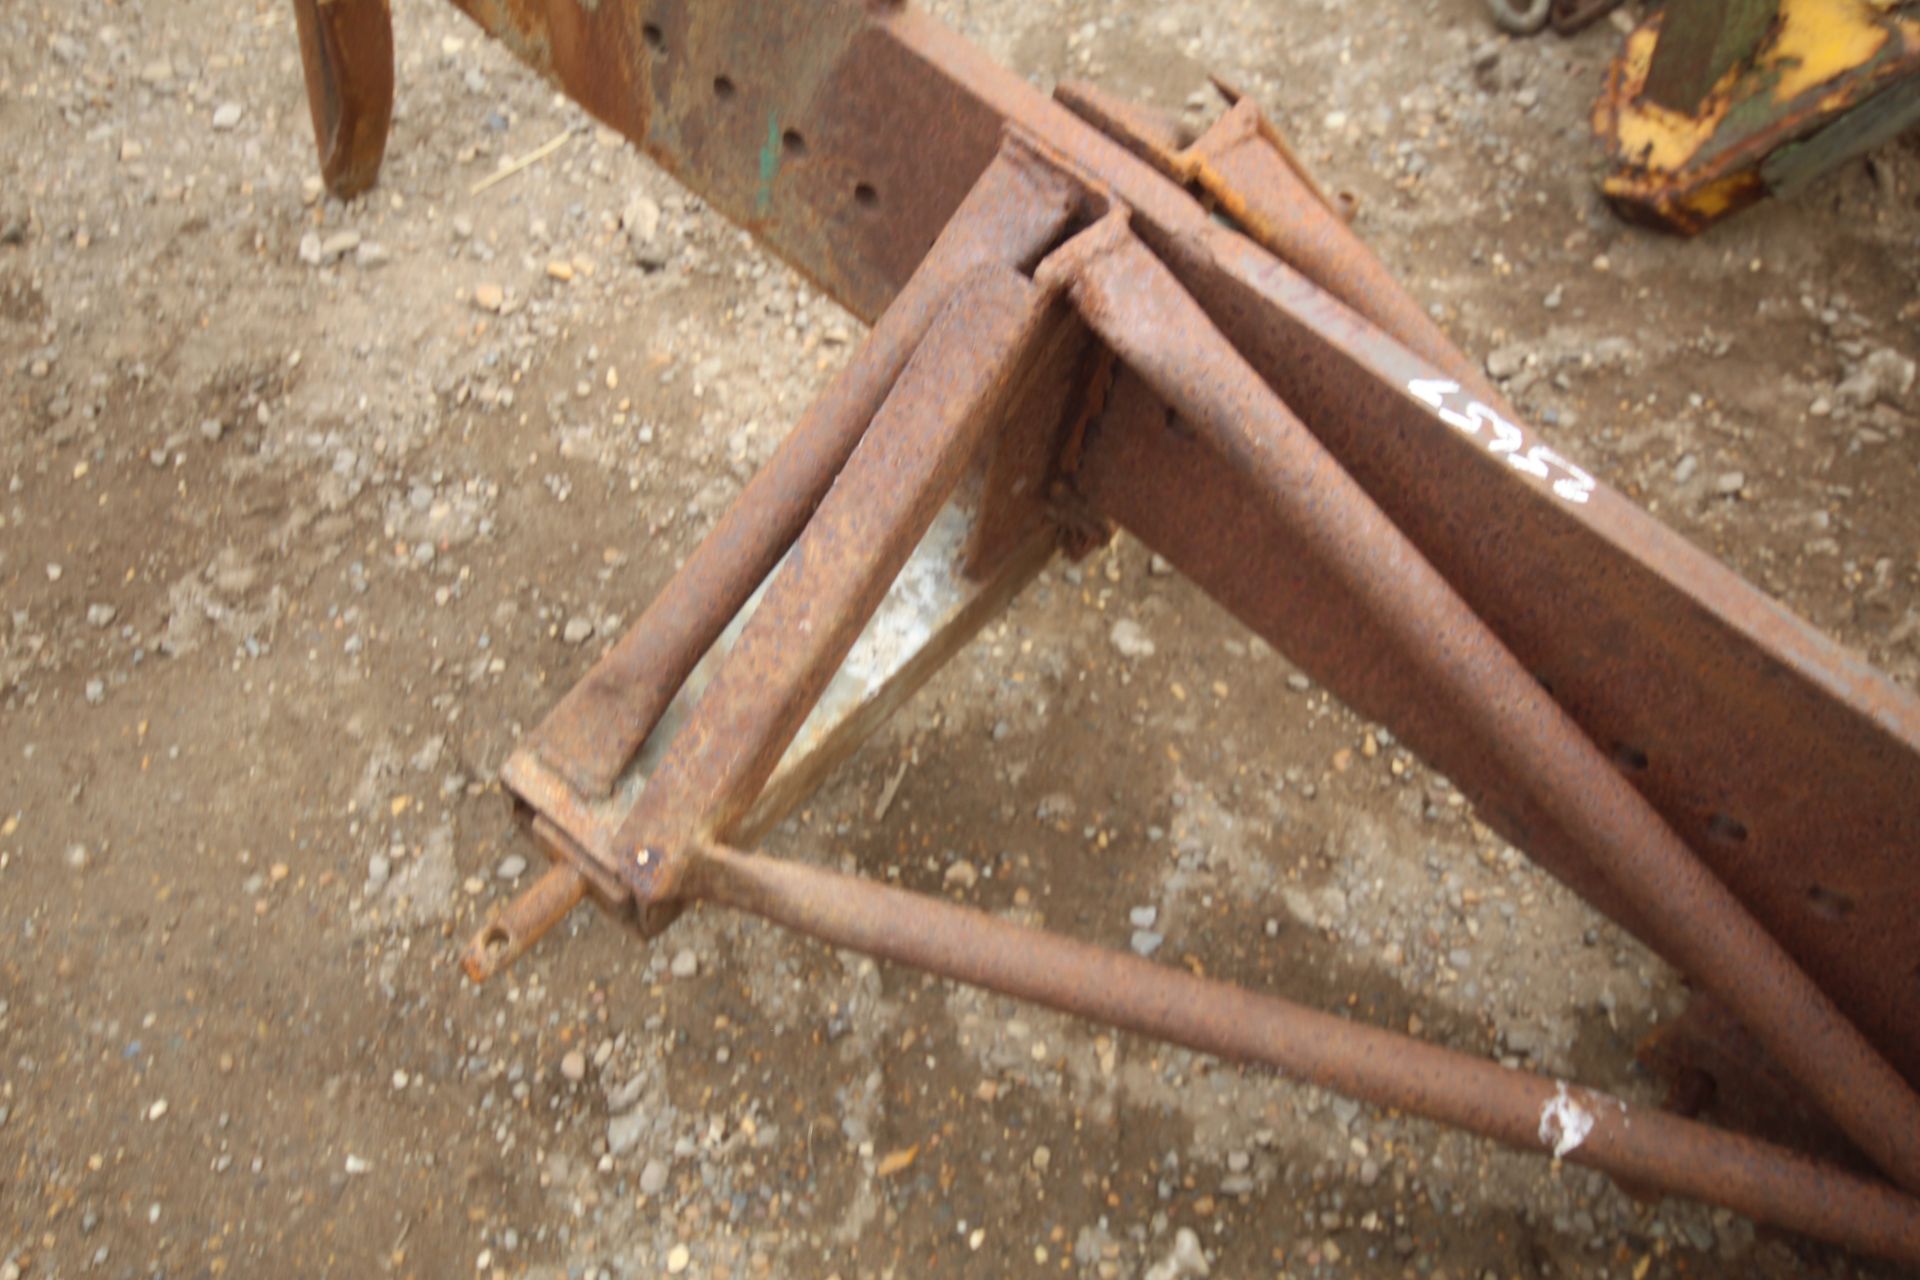 Linkage mounted mole drainer. - Image 5 of 7